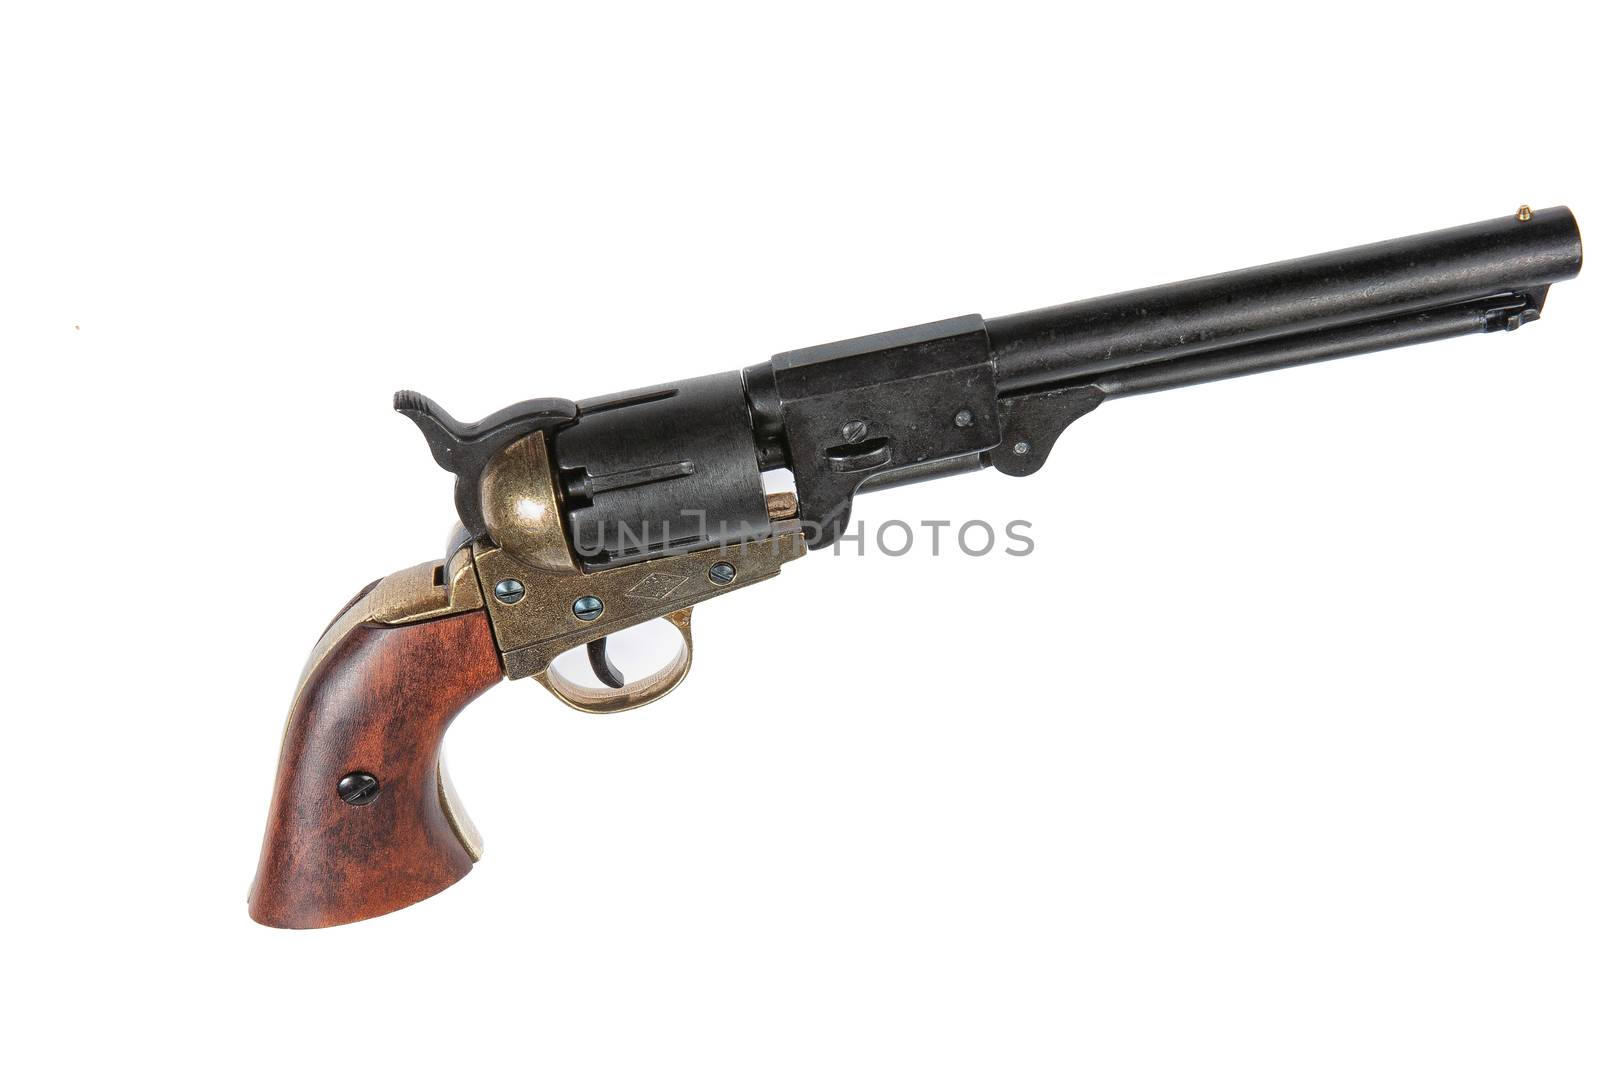 Old single action revolver on an isolated studio background